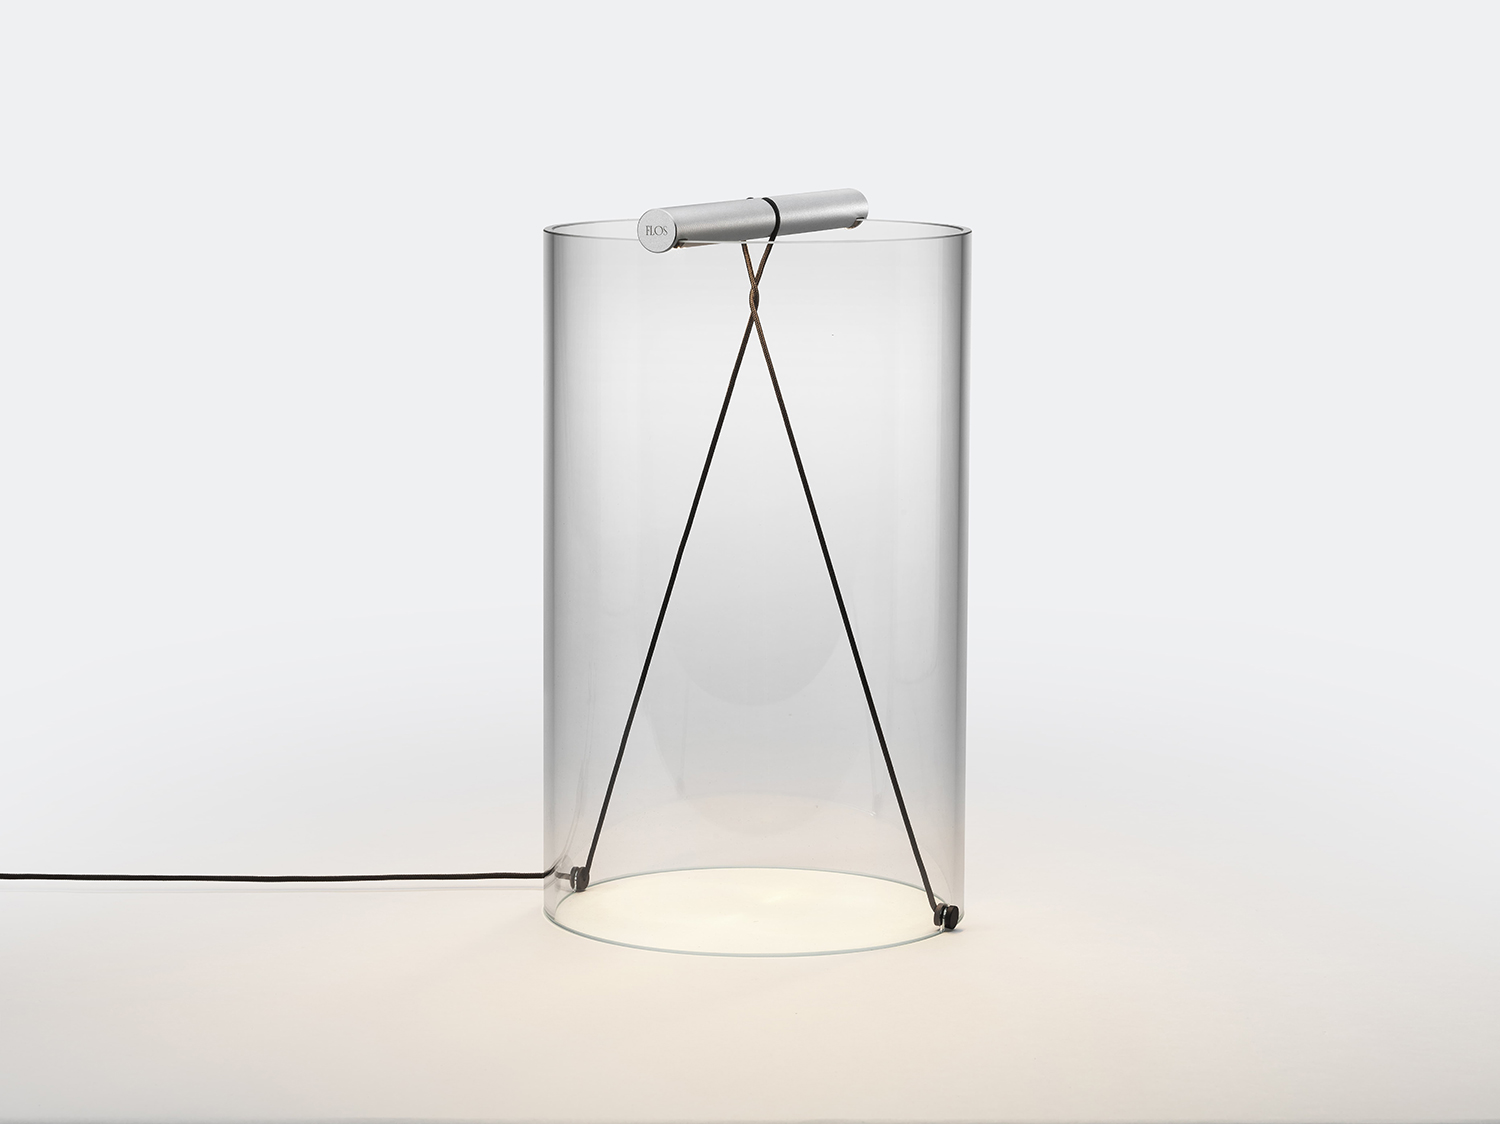 The tall version of the To-Tie anodized aluminium grey lamp